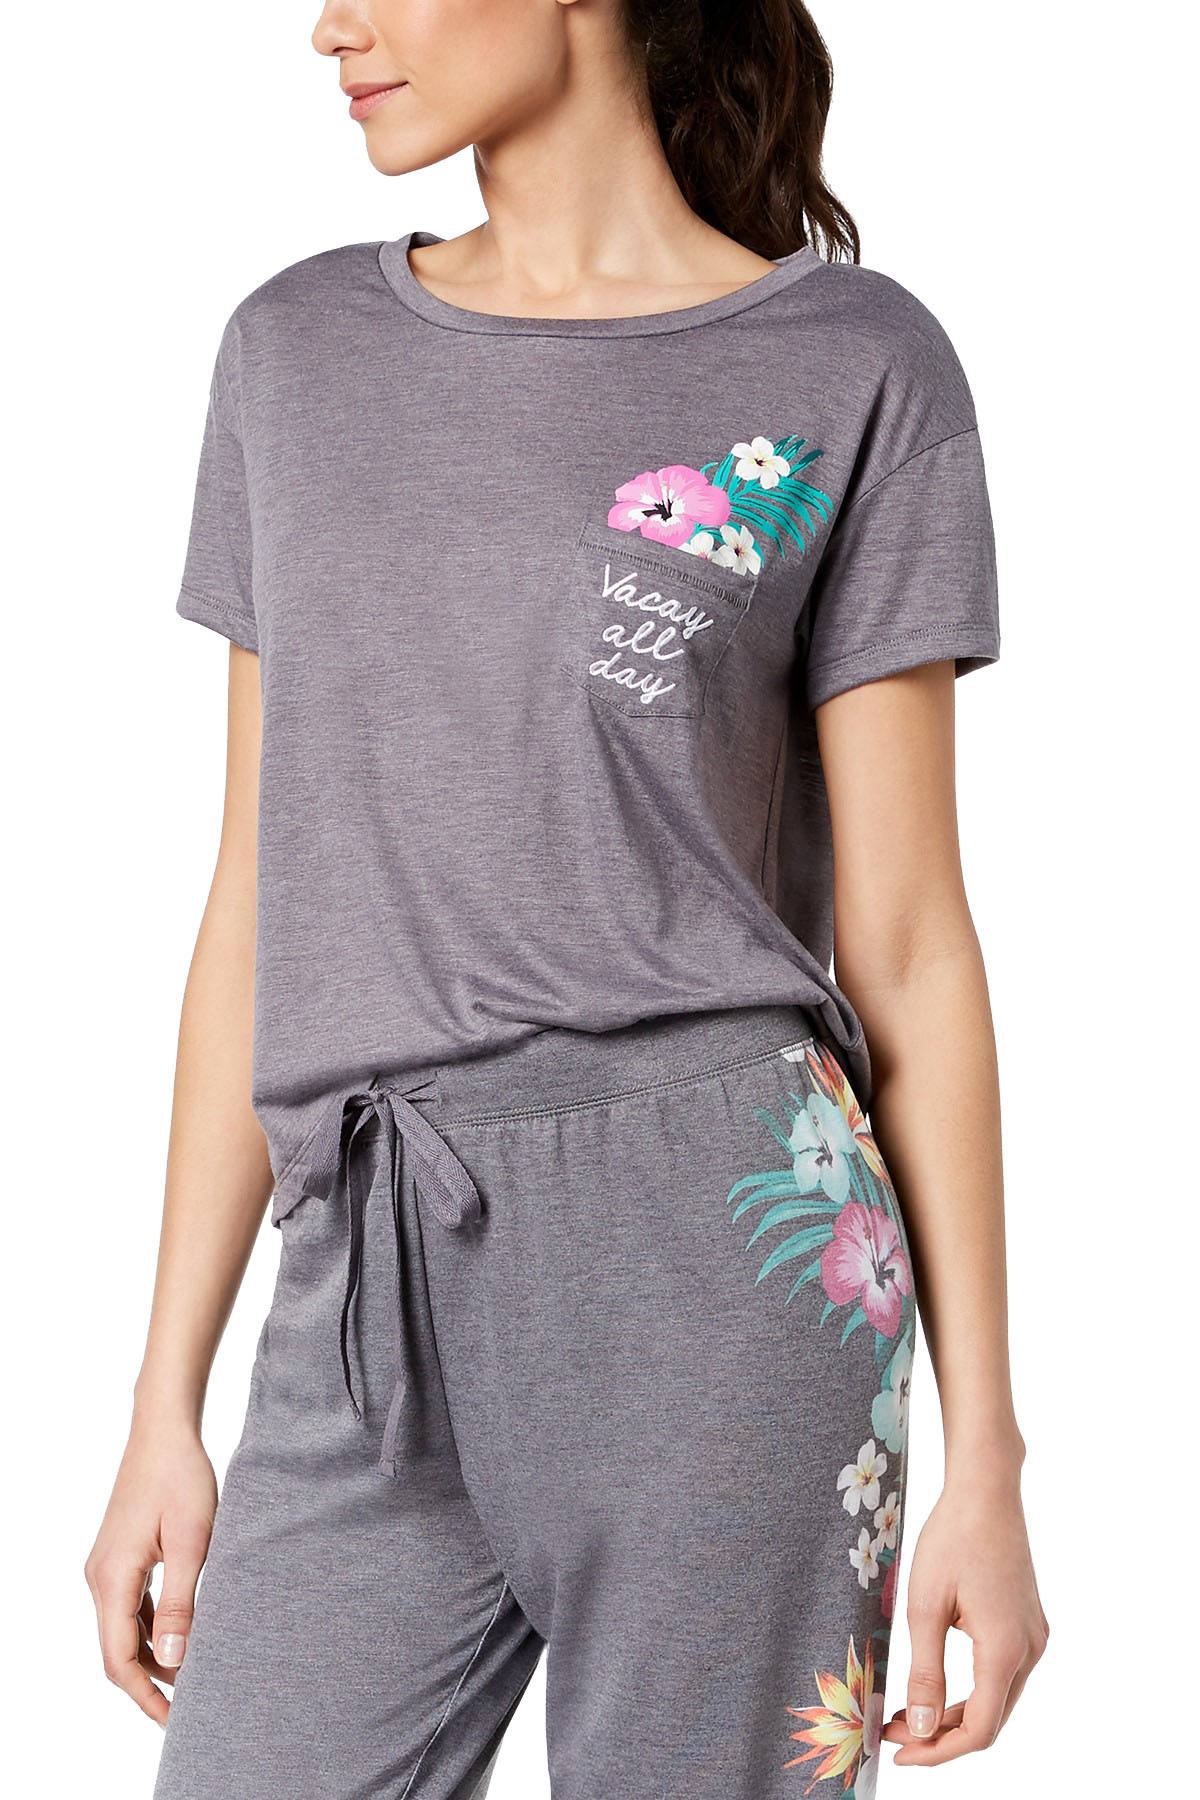 Jenni PLUS Embroidered Pocket Tee in Pewter-Heather Vacay